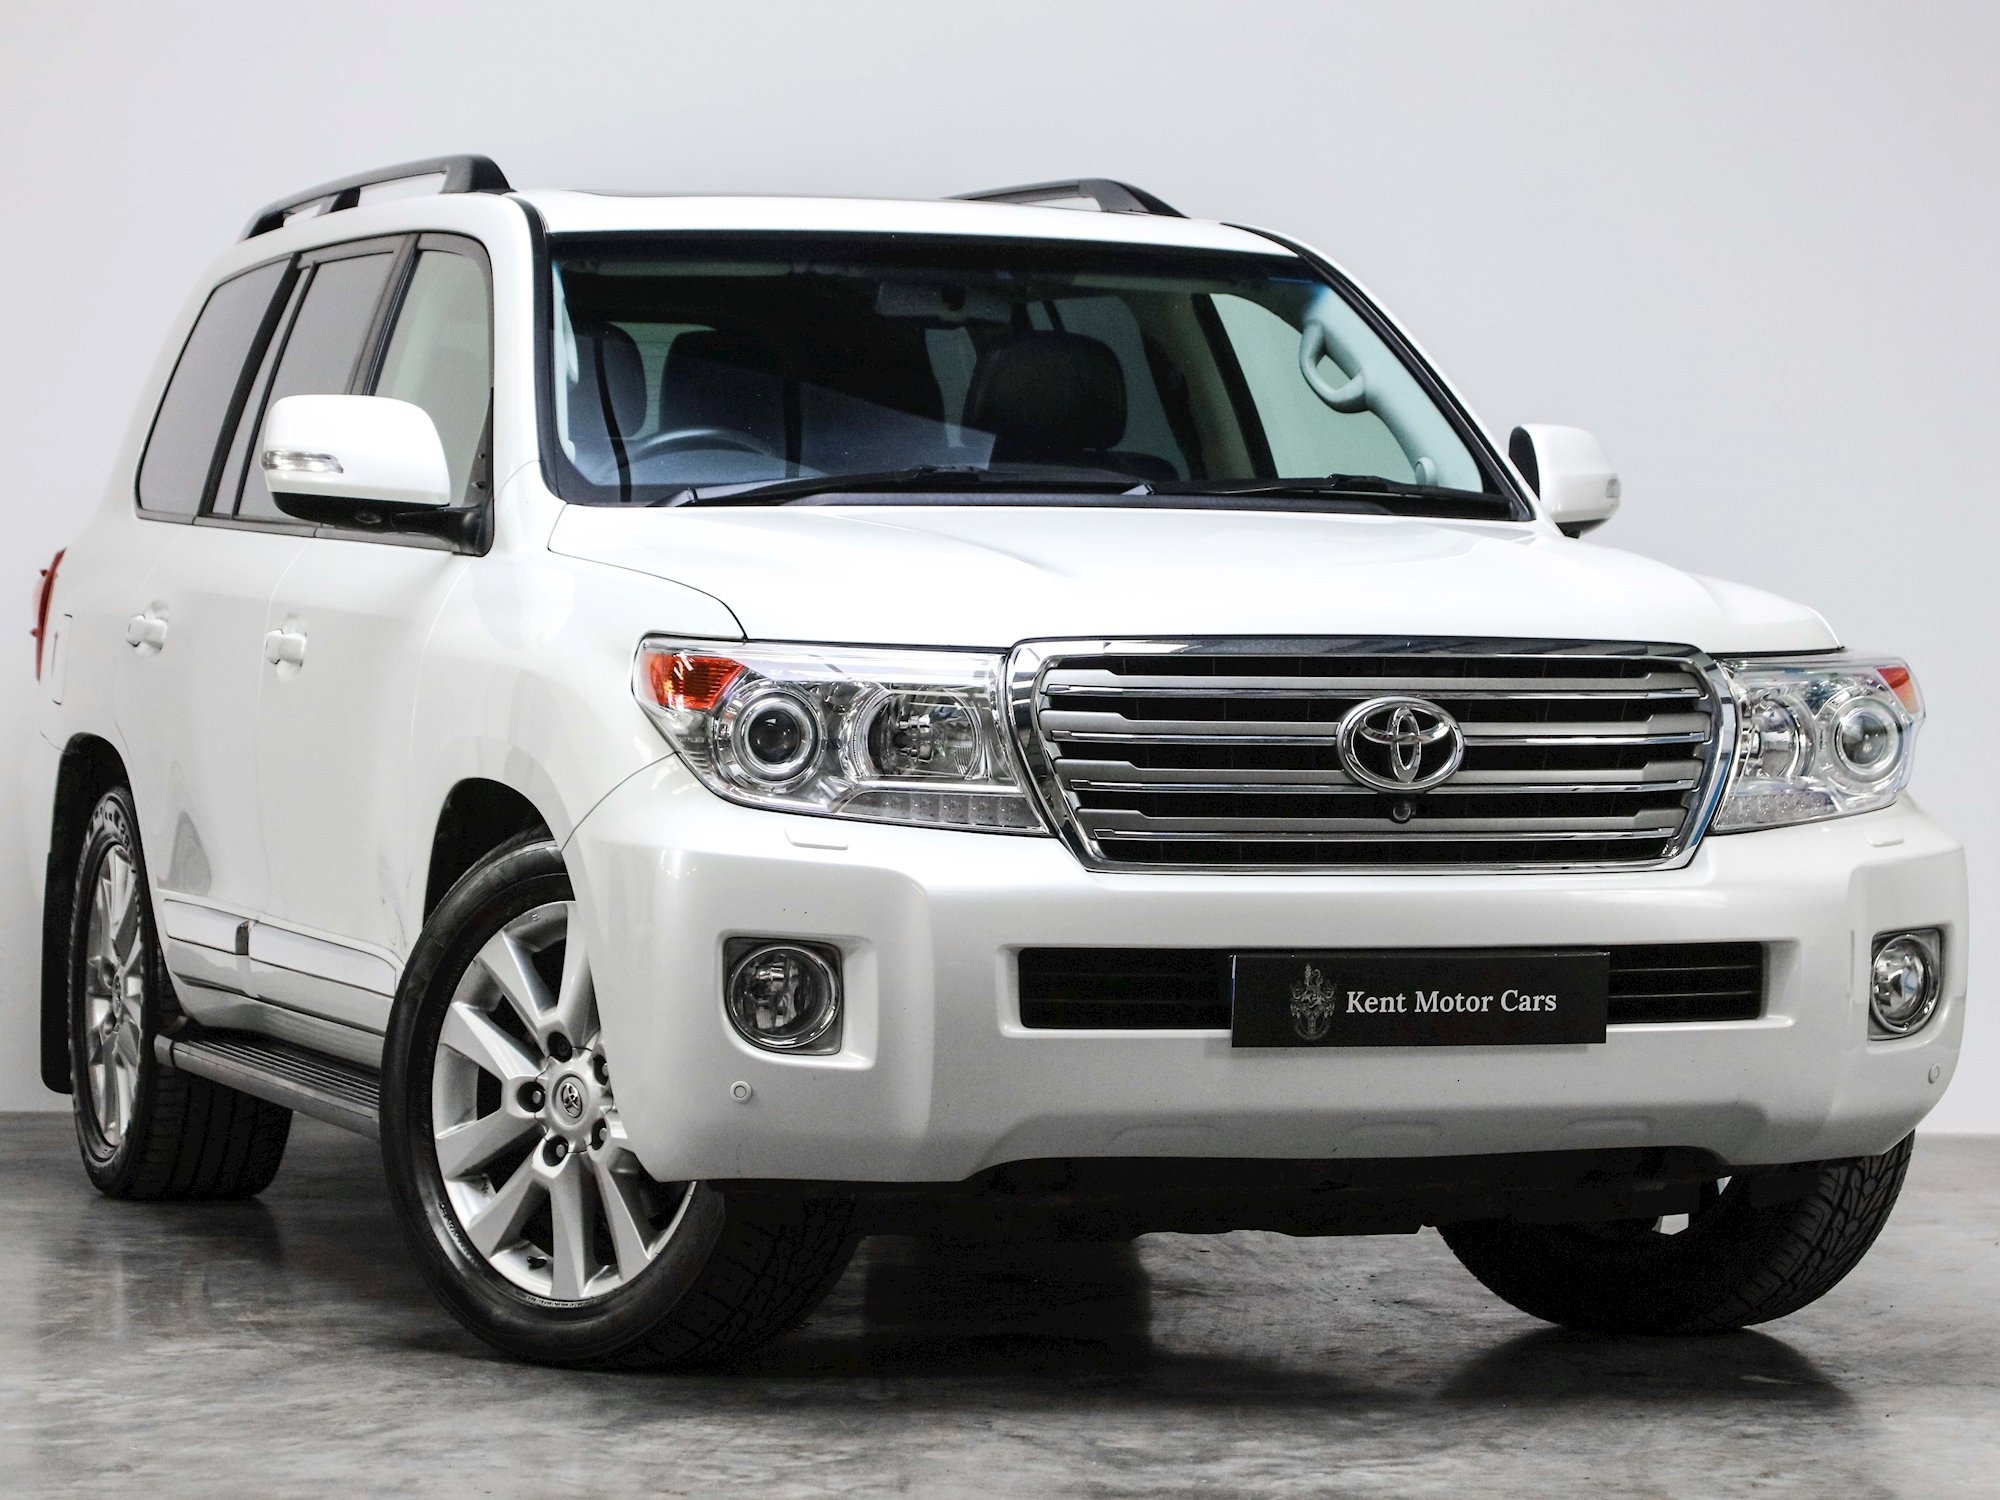 Used Toyota LAND CRUISER V8 D-4D V8 2015 5dr Automatic (FY65RZP